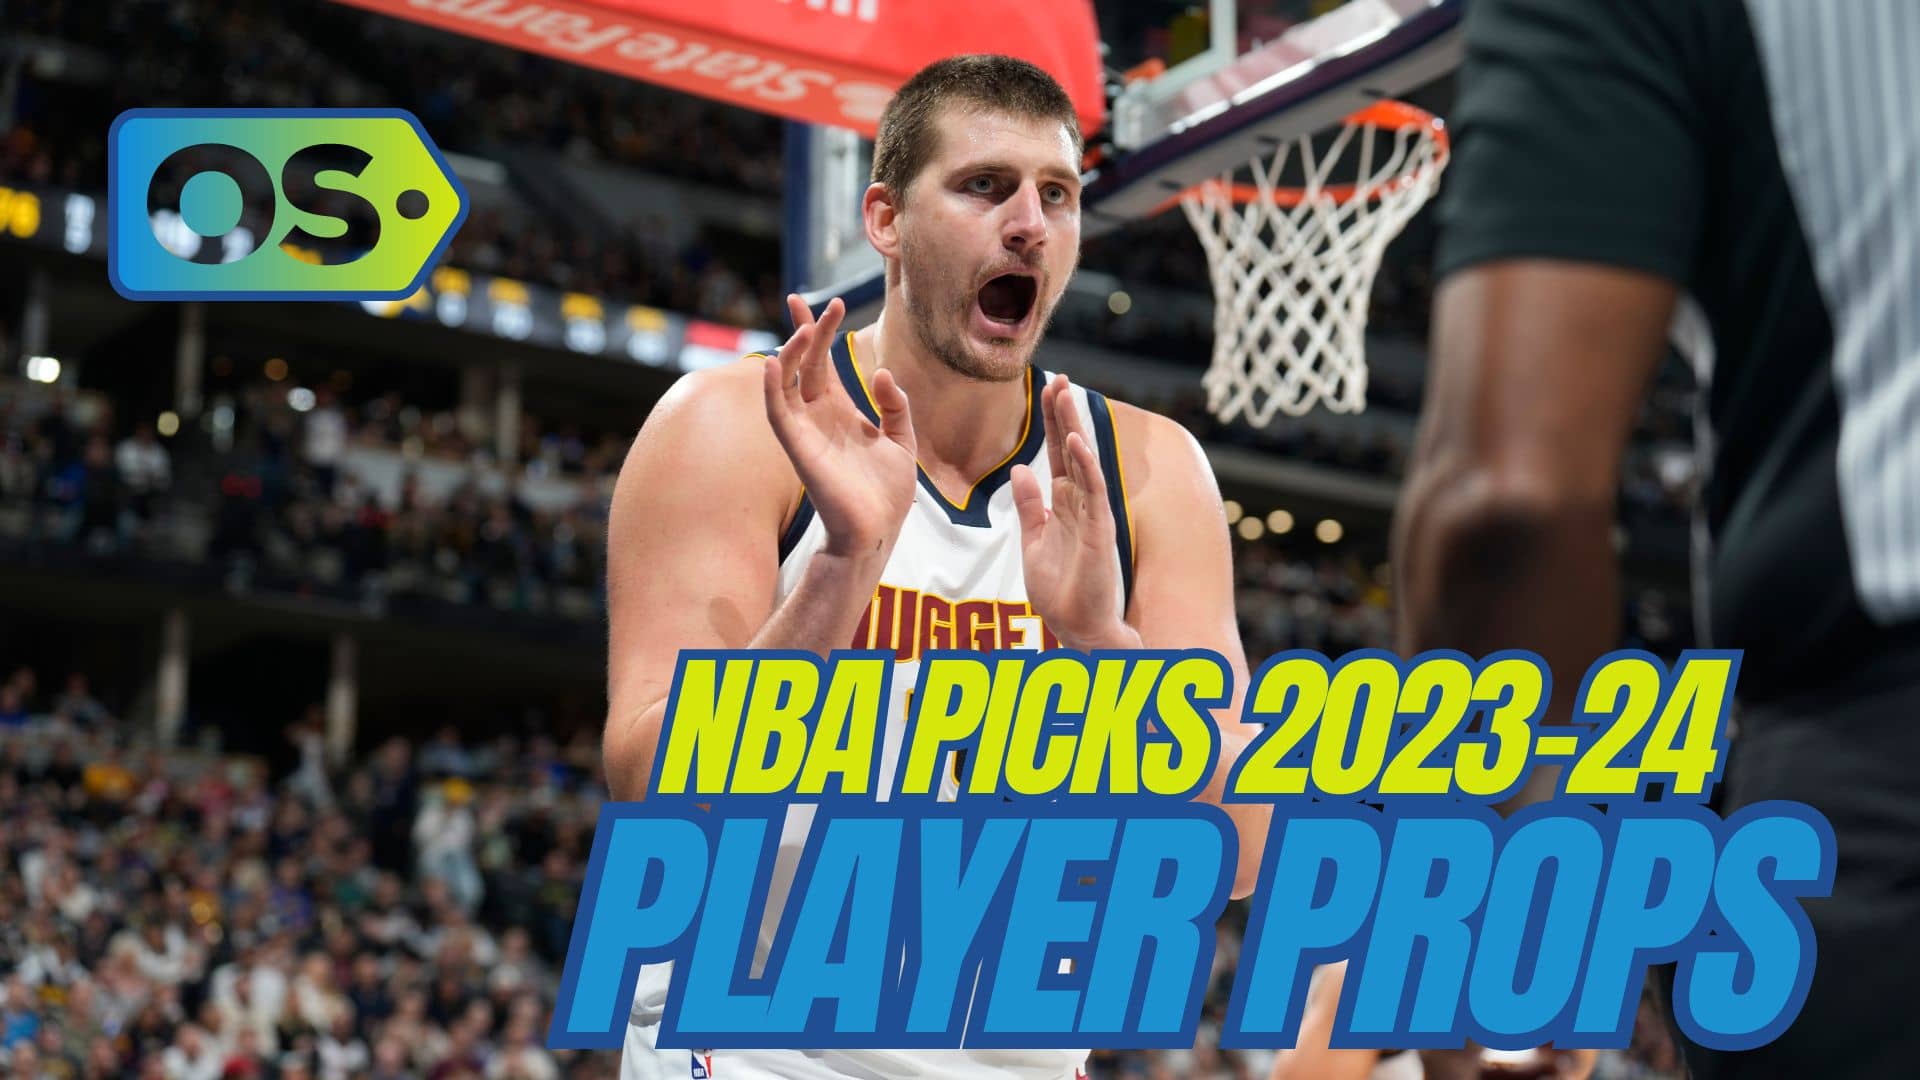 The best NBA player prop bets and picks today for today, Friday, November 24, include wagers on Nikola Jokic and Domantas Sabonis.